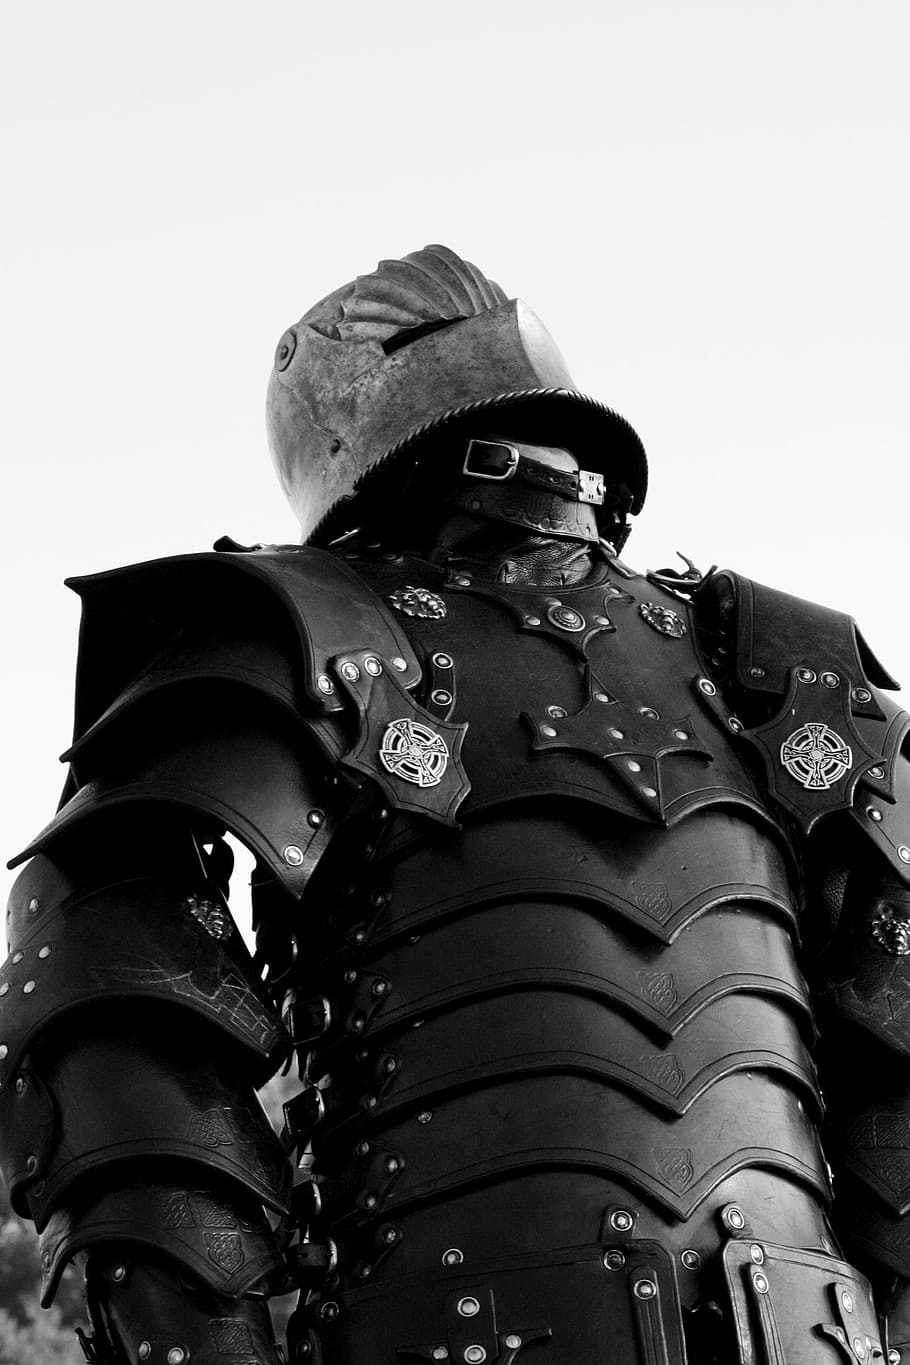 medieval knight armor, knight, ritterruestung, middle ages, historically, armor knight, old knight armor, armor, helm, metal